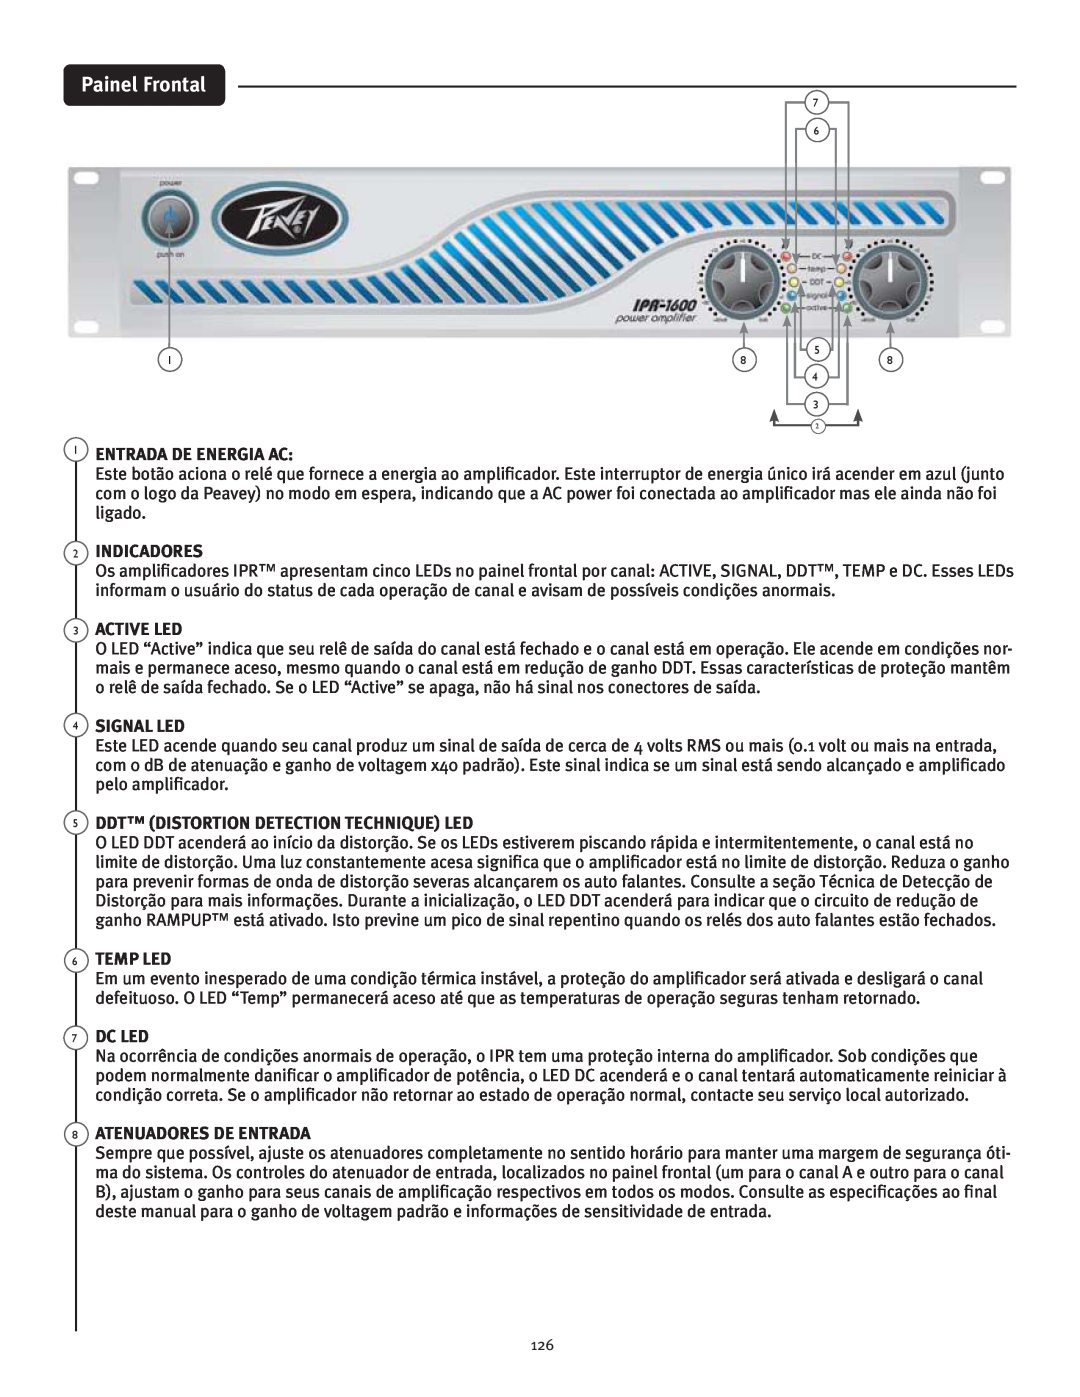 Peavey IPR 4500, IPR 3000 Painel Frontal, Entrada De Energia Ac, Indicadores, Active Led, Signal Led, Temp Led, Dc Led 